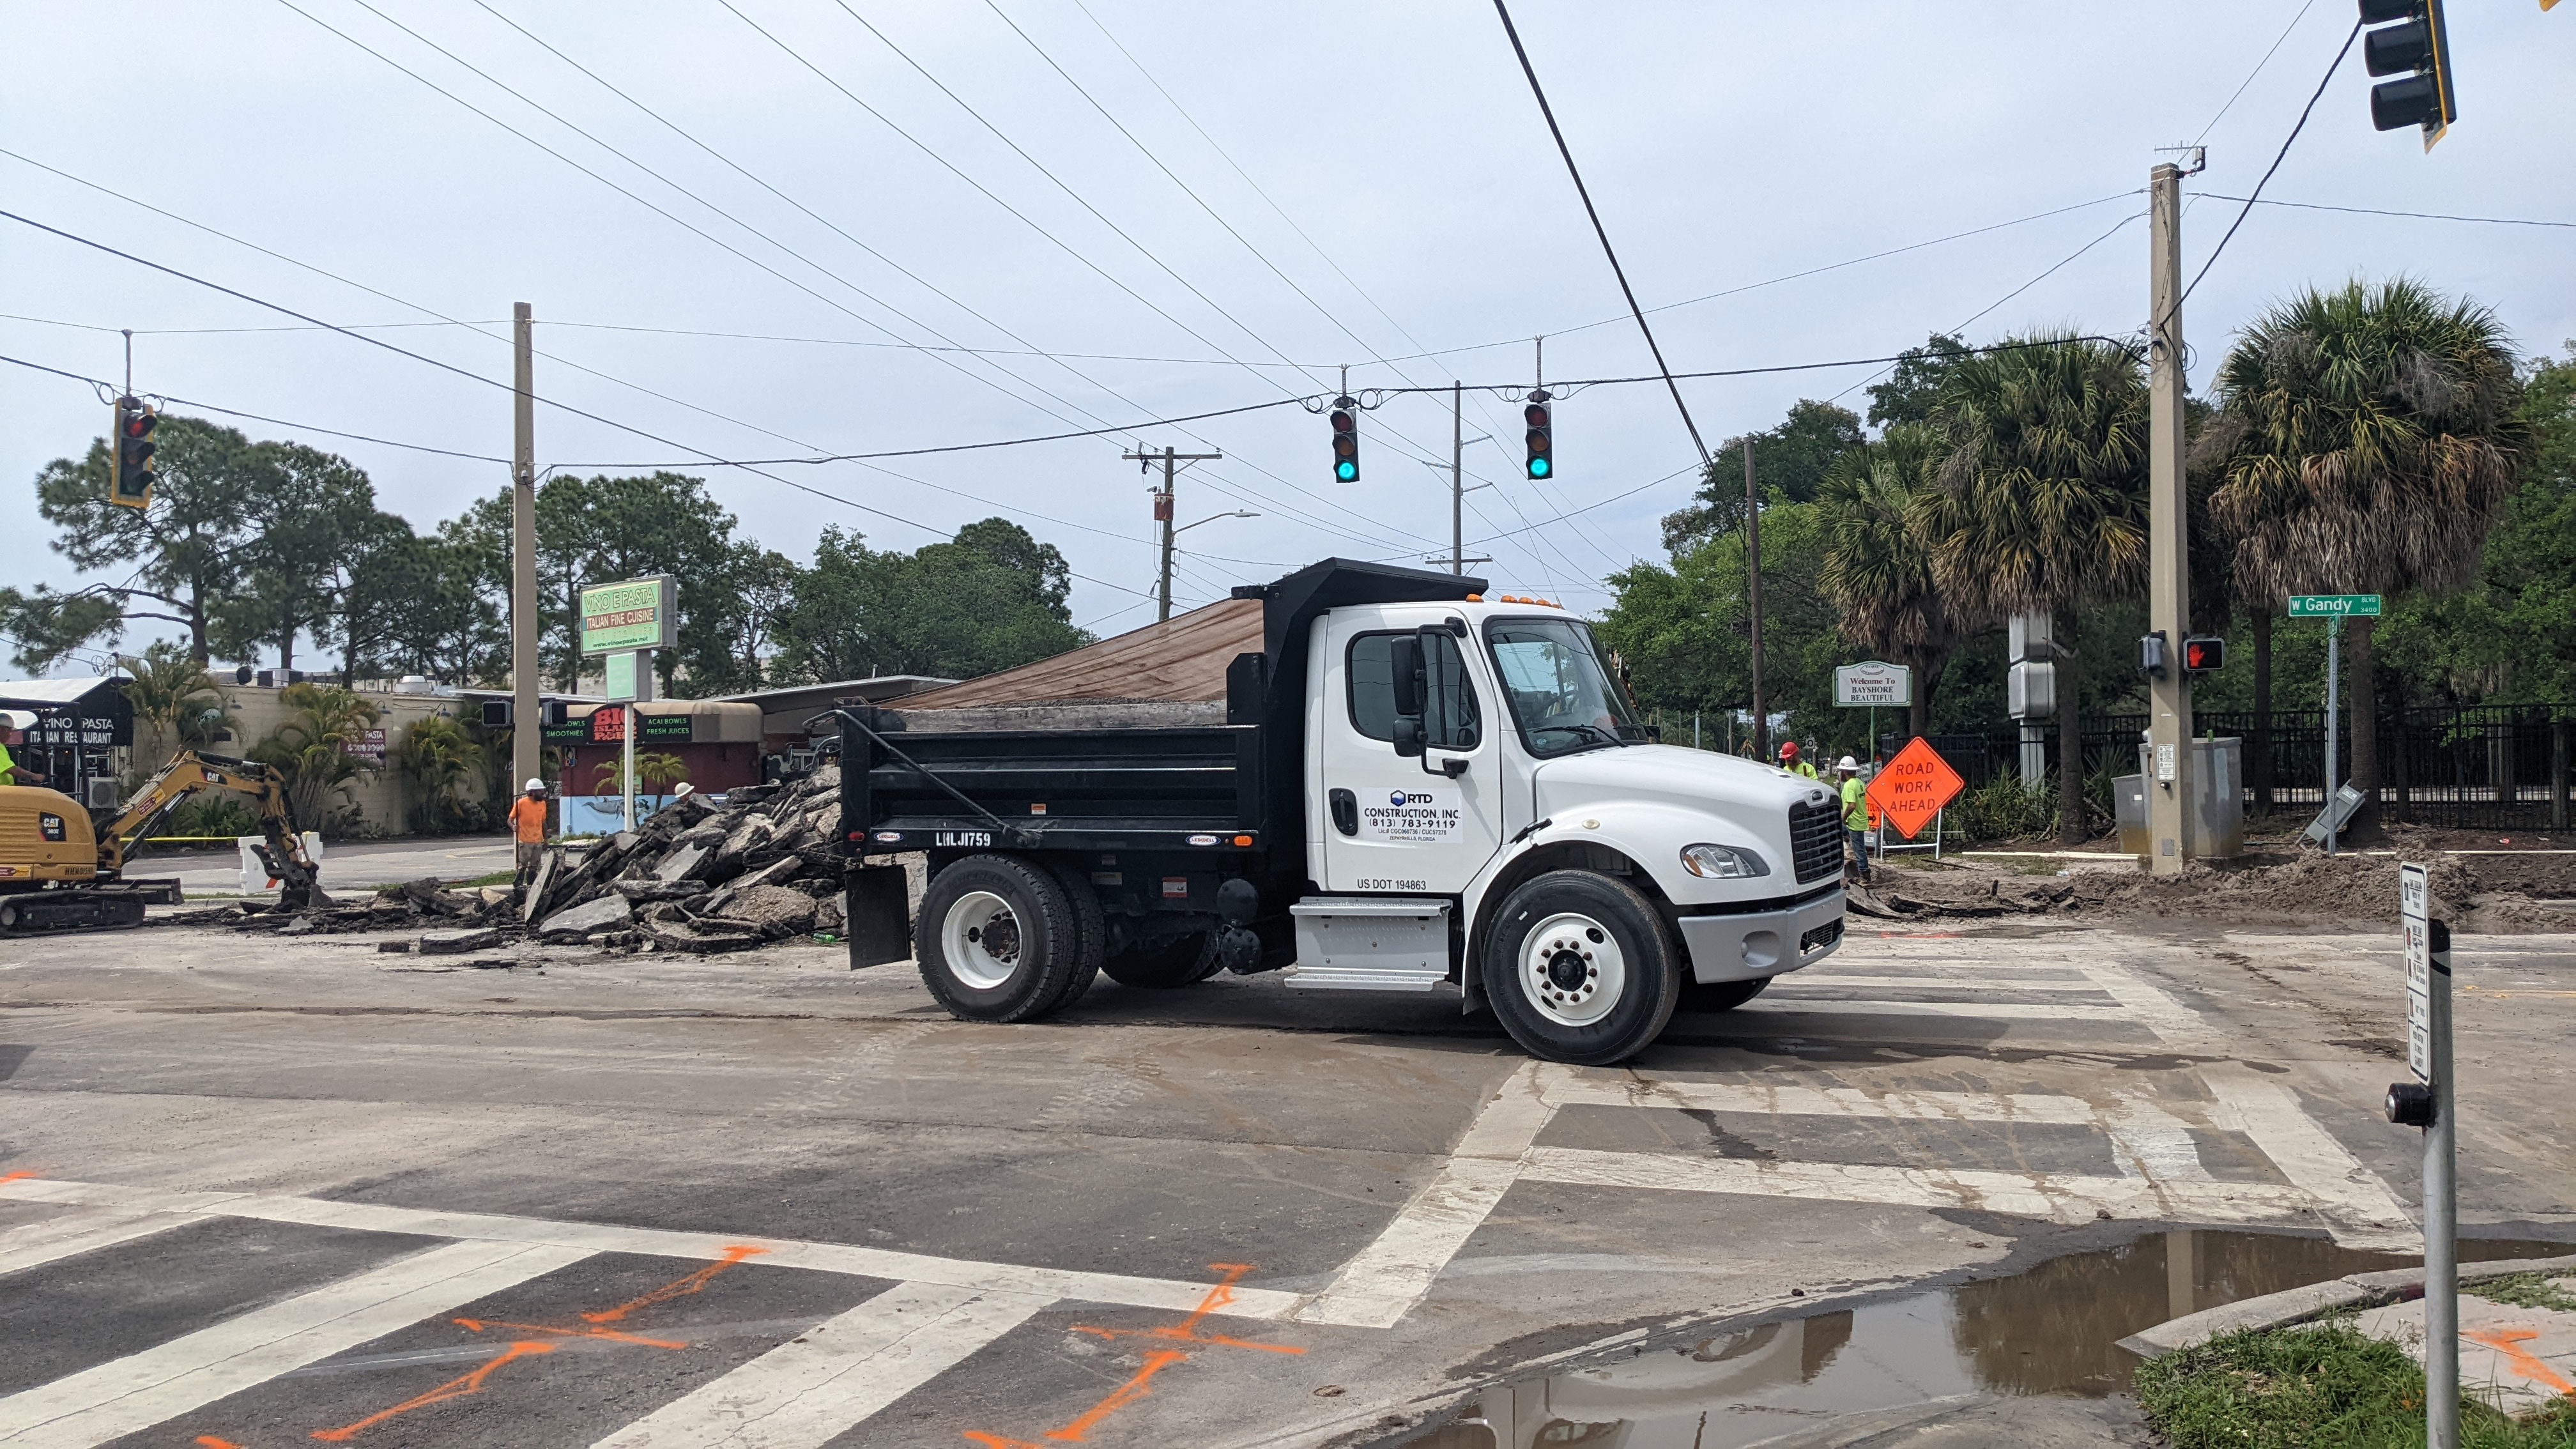 South Tampa water main break to close major intersection beyond Easter, officials say – CBS Tampa